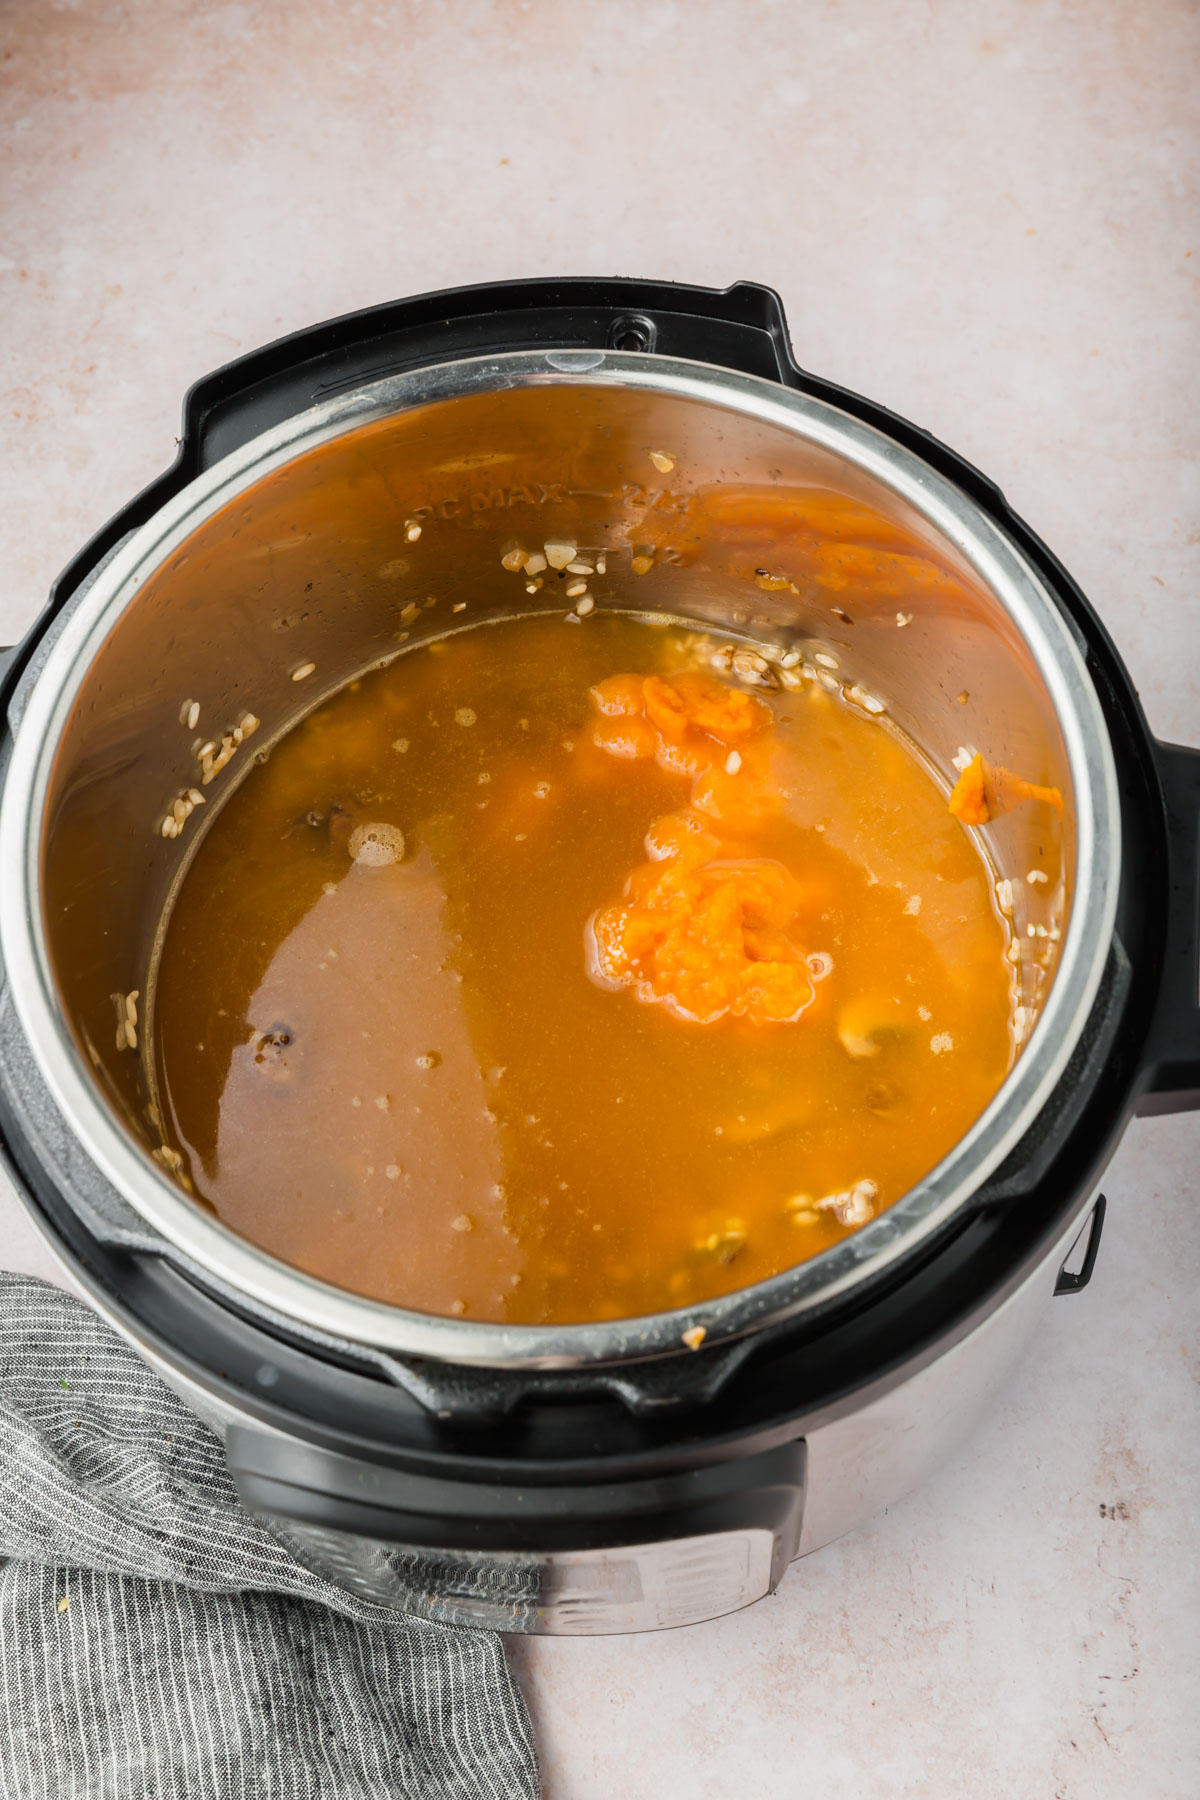 An Instant Pot filled with chicken broth, arborio rice, and pumpkin puree before mixing together.